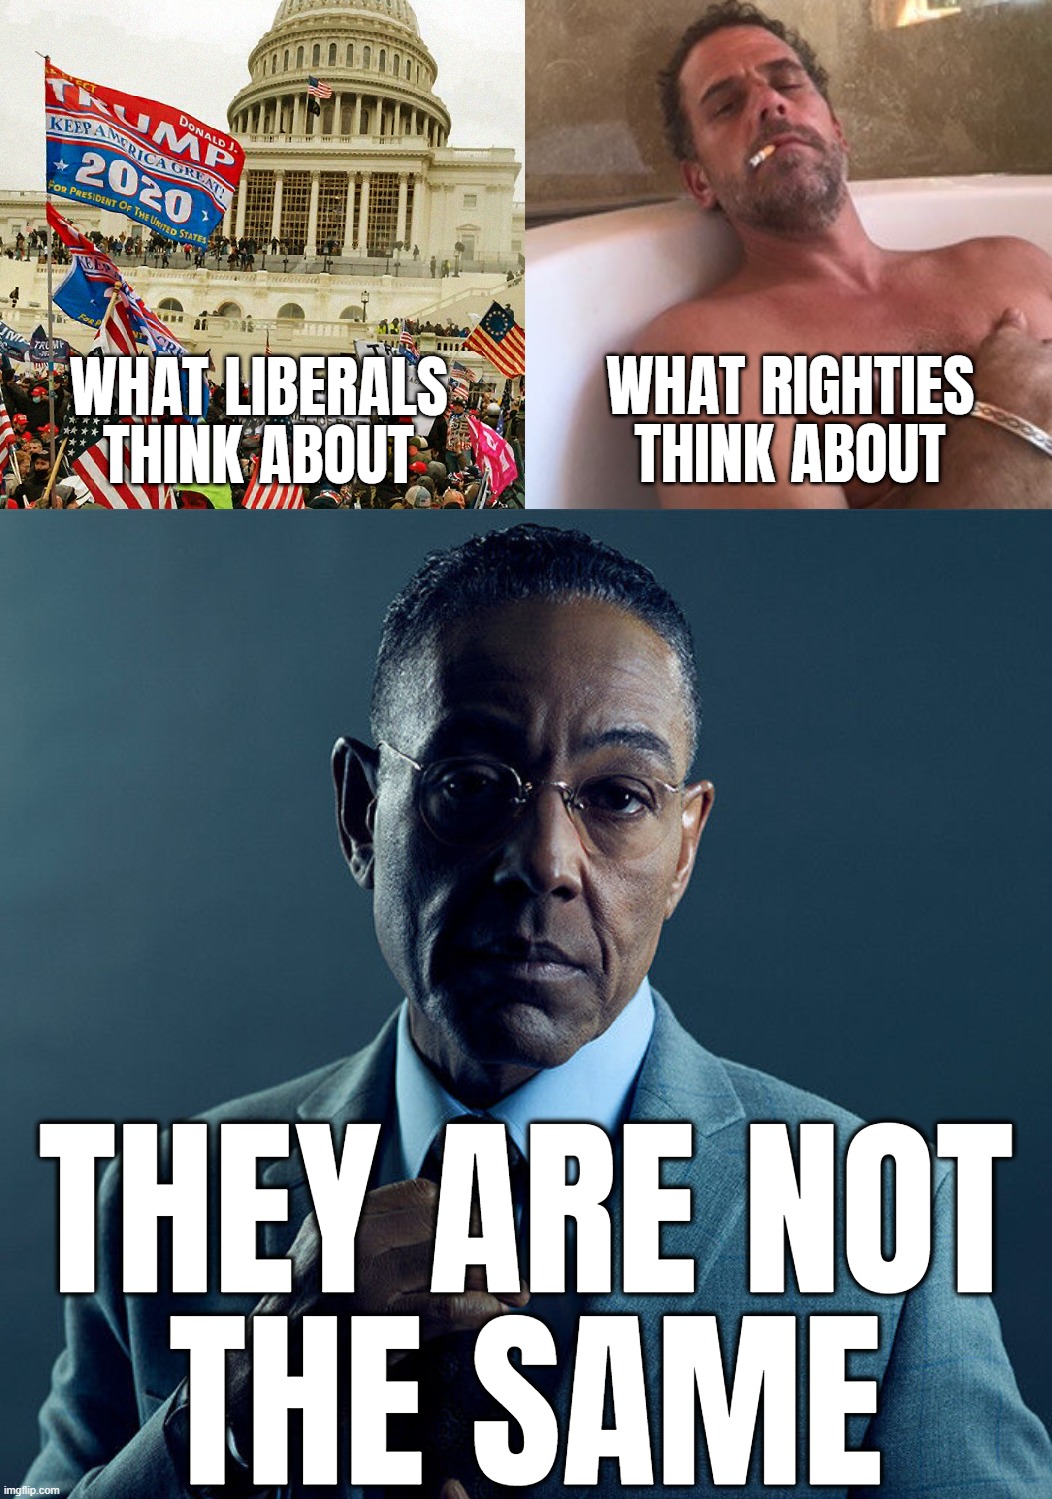 NOT THE SAME! | THEY ARE NOT
THE SAME | image tagged in gus fring we are not the same,liberals,righties,conservative hypocrisy,capitol hill,hunter biden | made w/ Imgflip meme maker